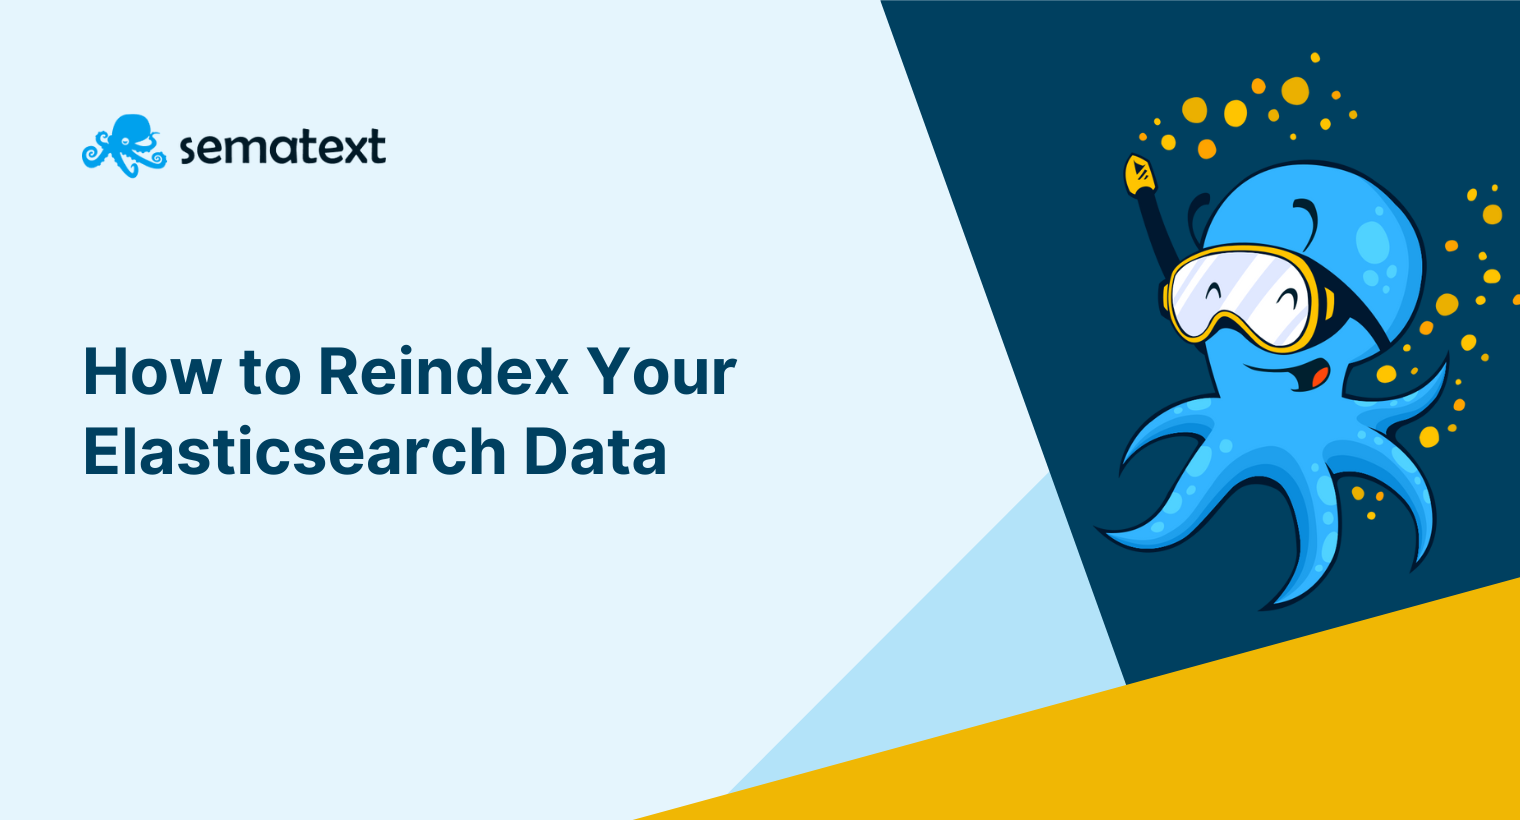 How to reindex your Elasticsearch data